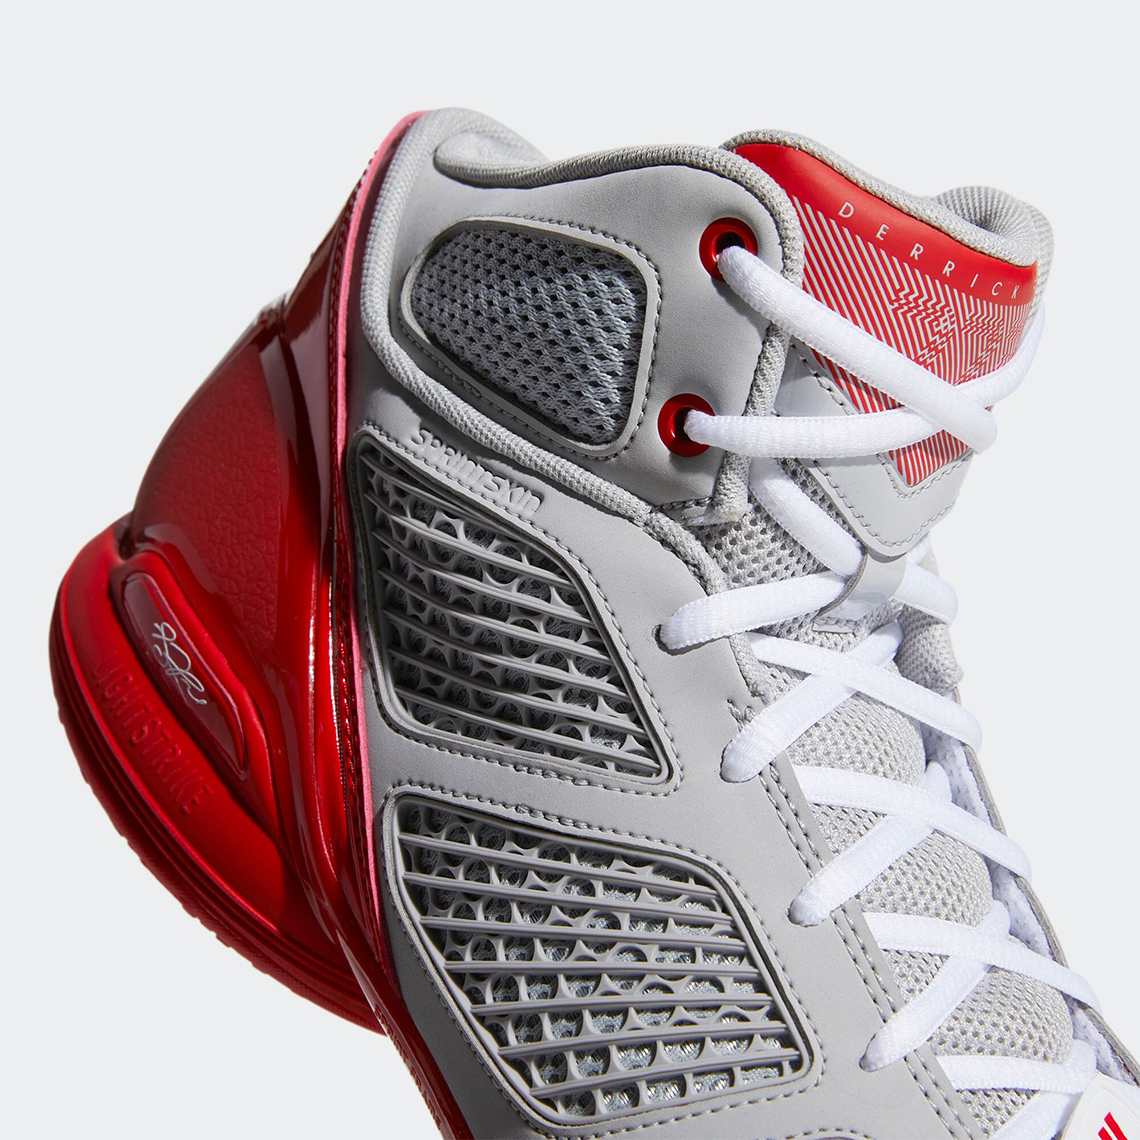 Adidas D Rose 1 5 White Grey Red Gy0257 7